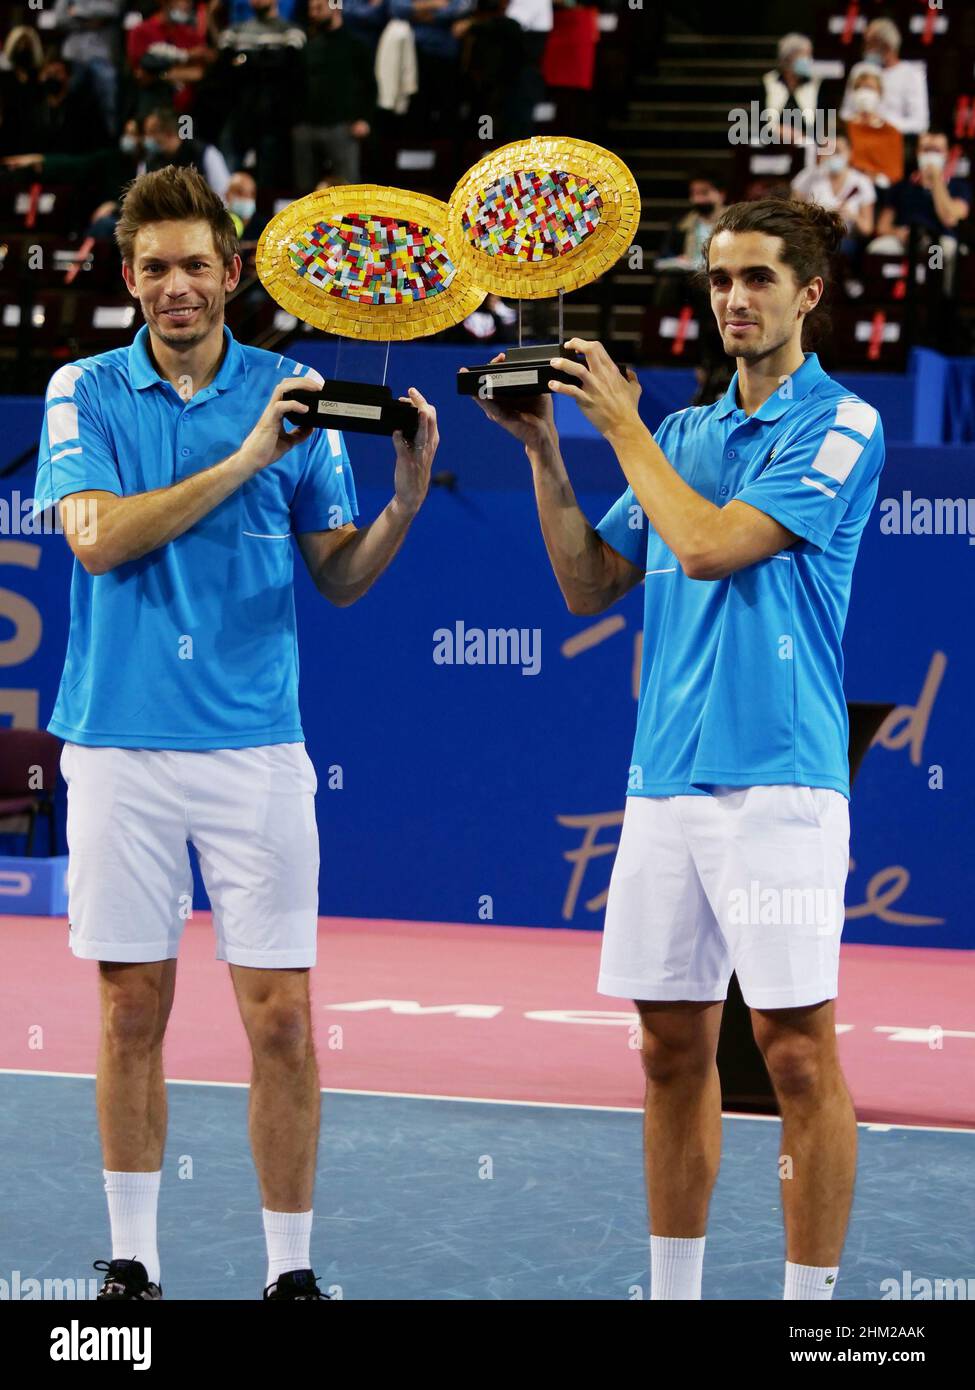 os selv pyramide kedel Nicolas Mahut and Pierre-Hughes Herbert of France celebrate with the  winners trophies after winning the Double final of the Open Sud de Fance  2022, ATP 250 tennis tournament on February 6, 2022